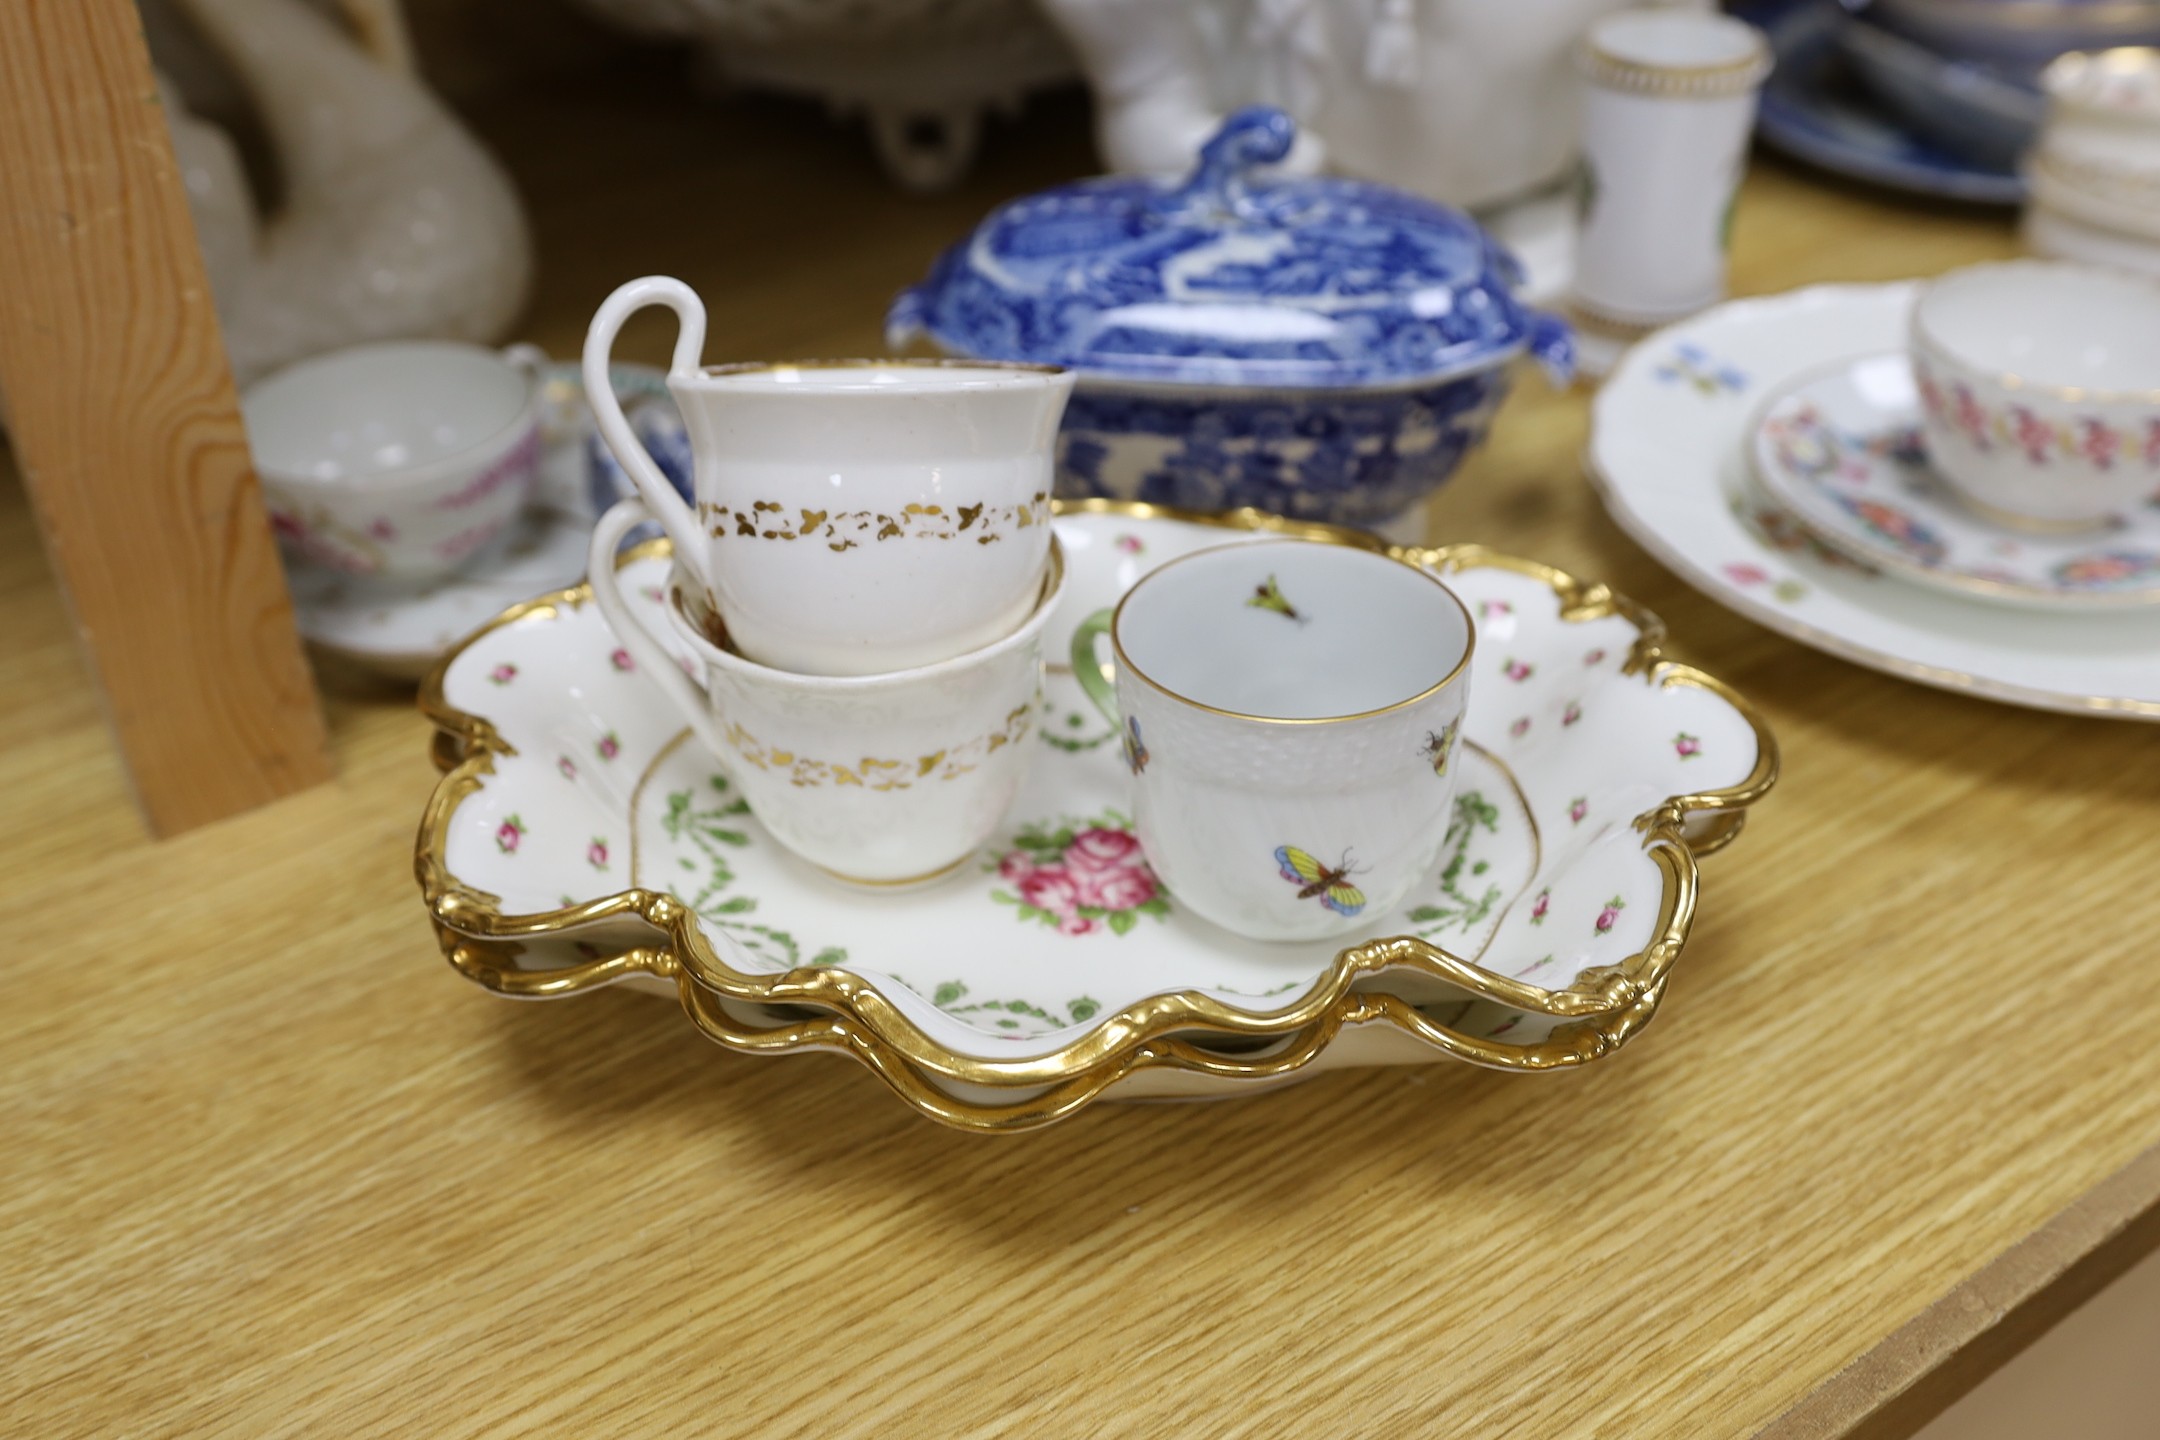 A group of Staffordshire blue and white pottery, including a sauce tureen and cover, together with a selection of decorative tea and dessert wares and ceramic centrepieces, one modelled as a cockerel